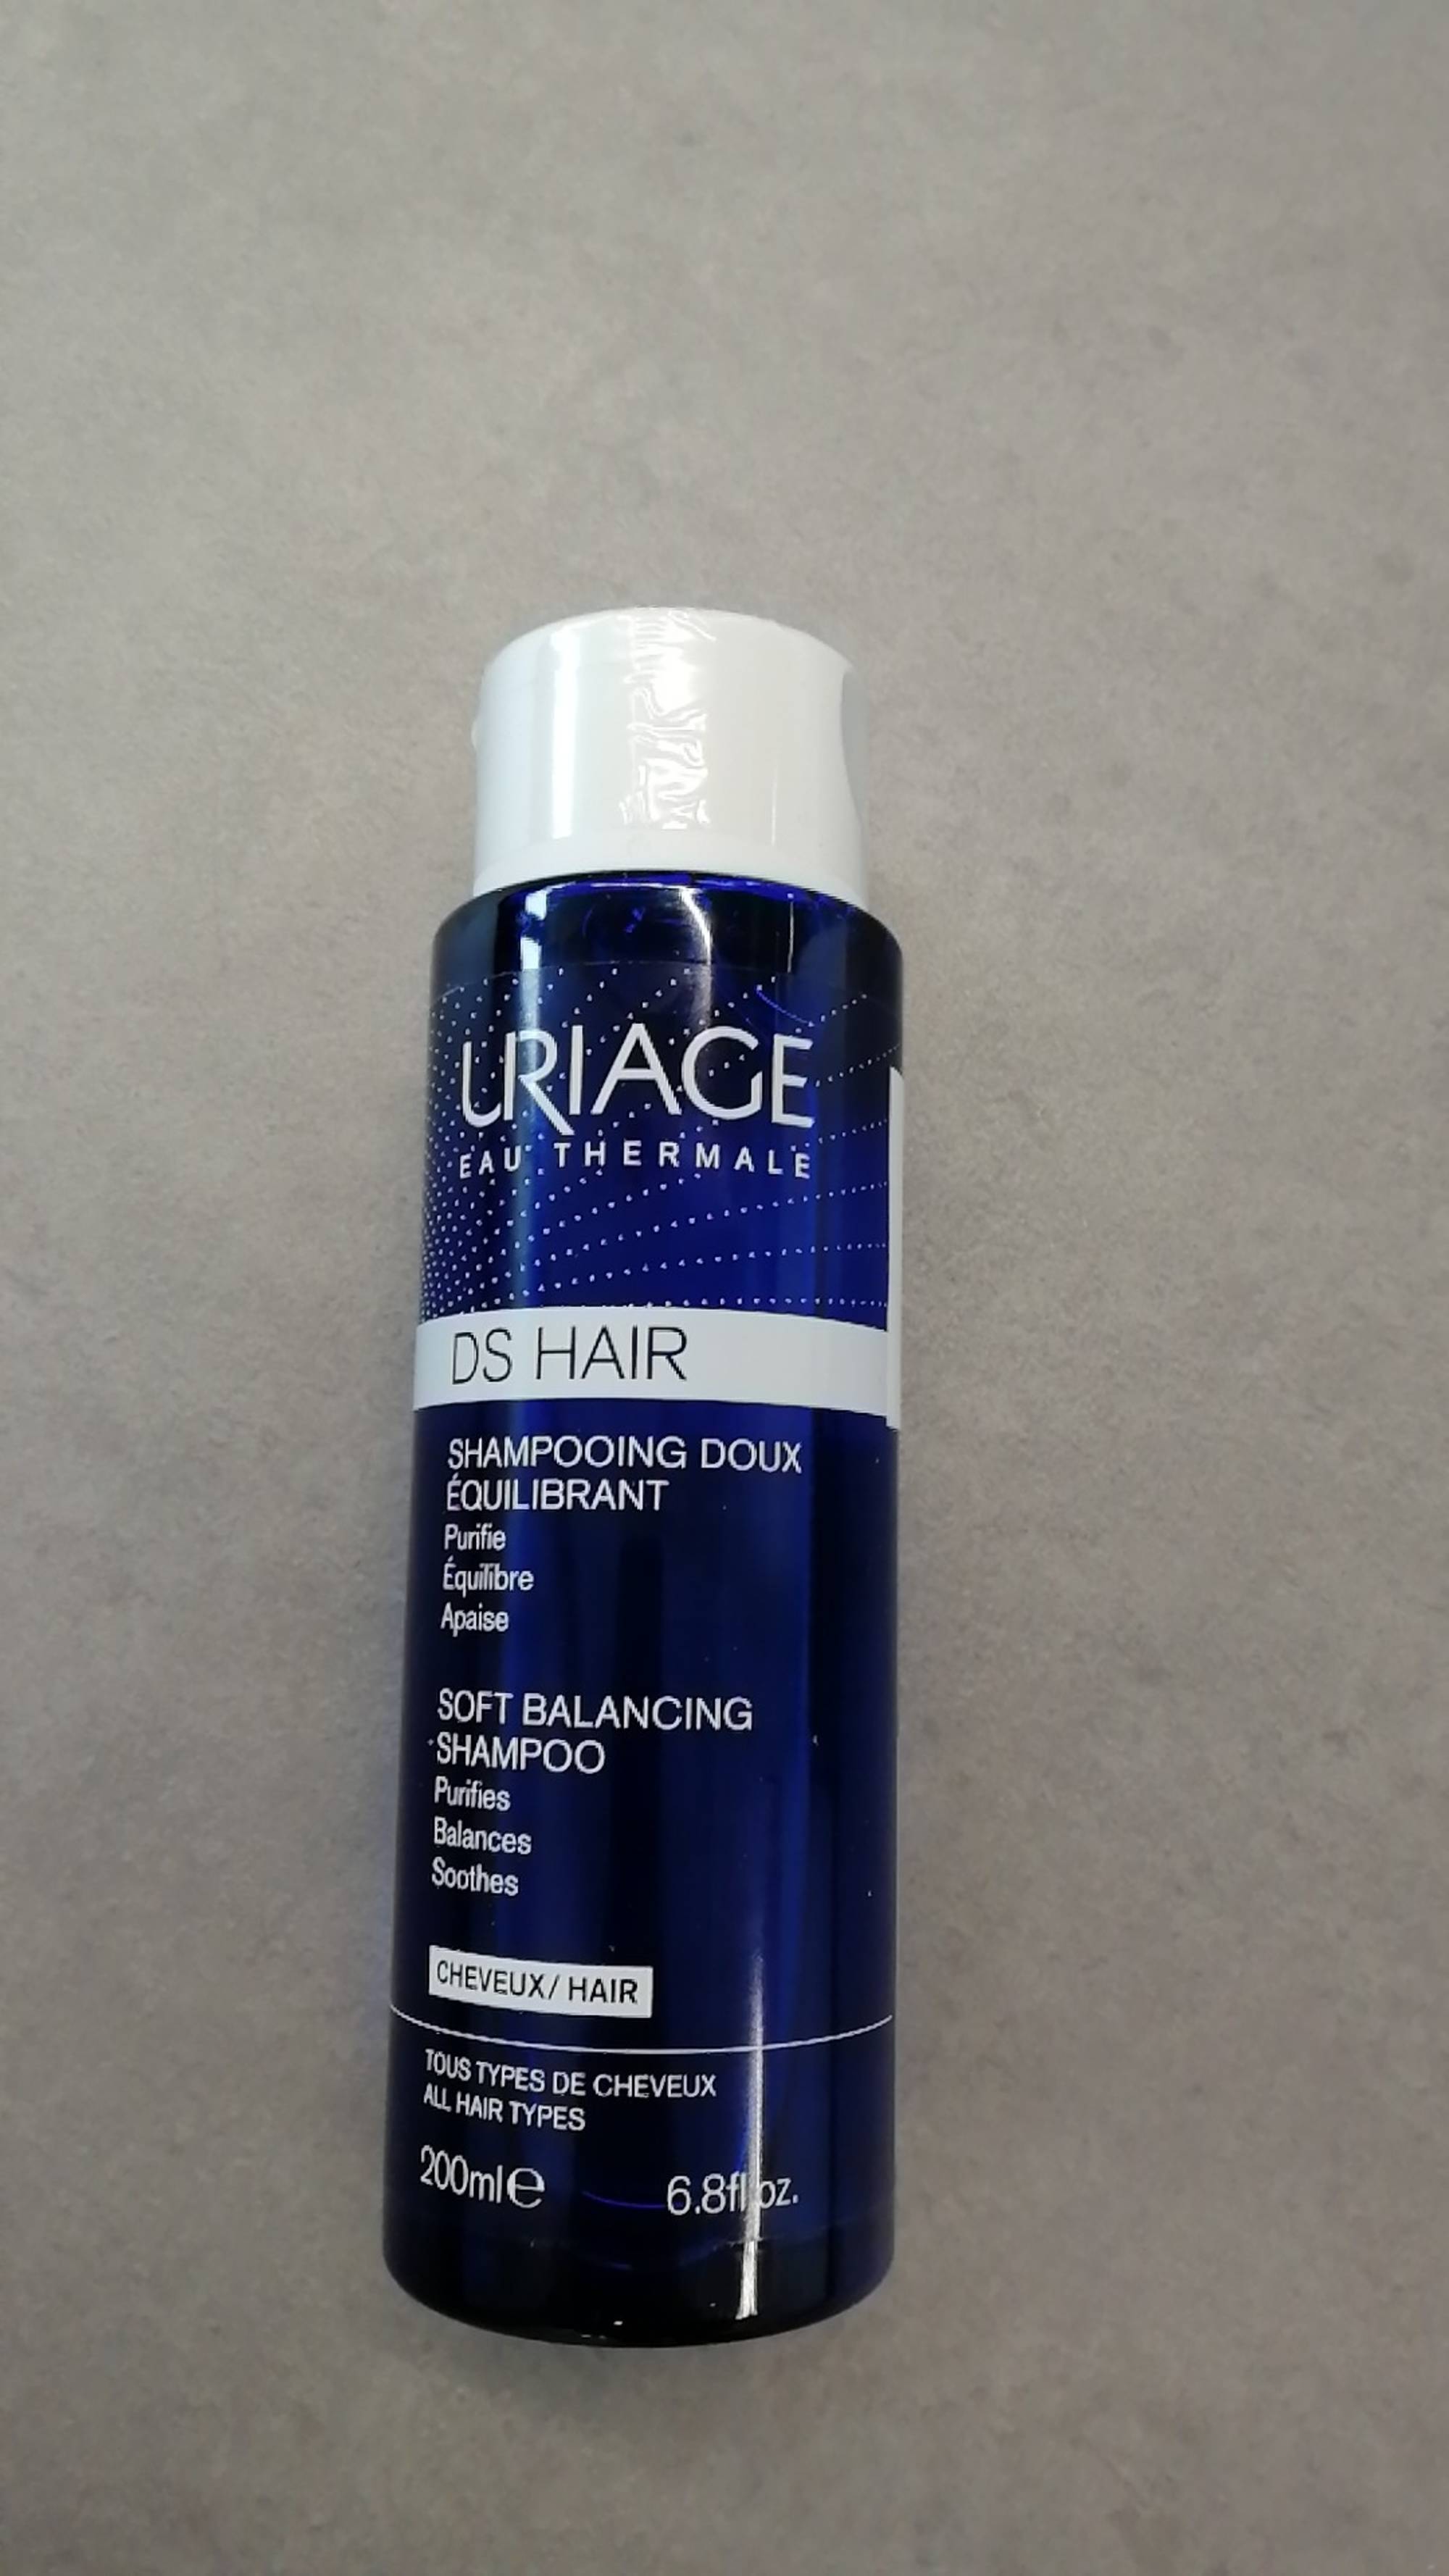 URIAGE - DS Hair - Shampooing doux équilibrant